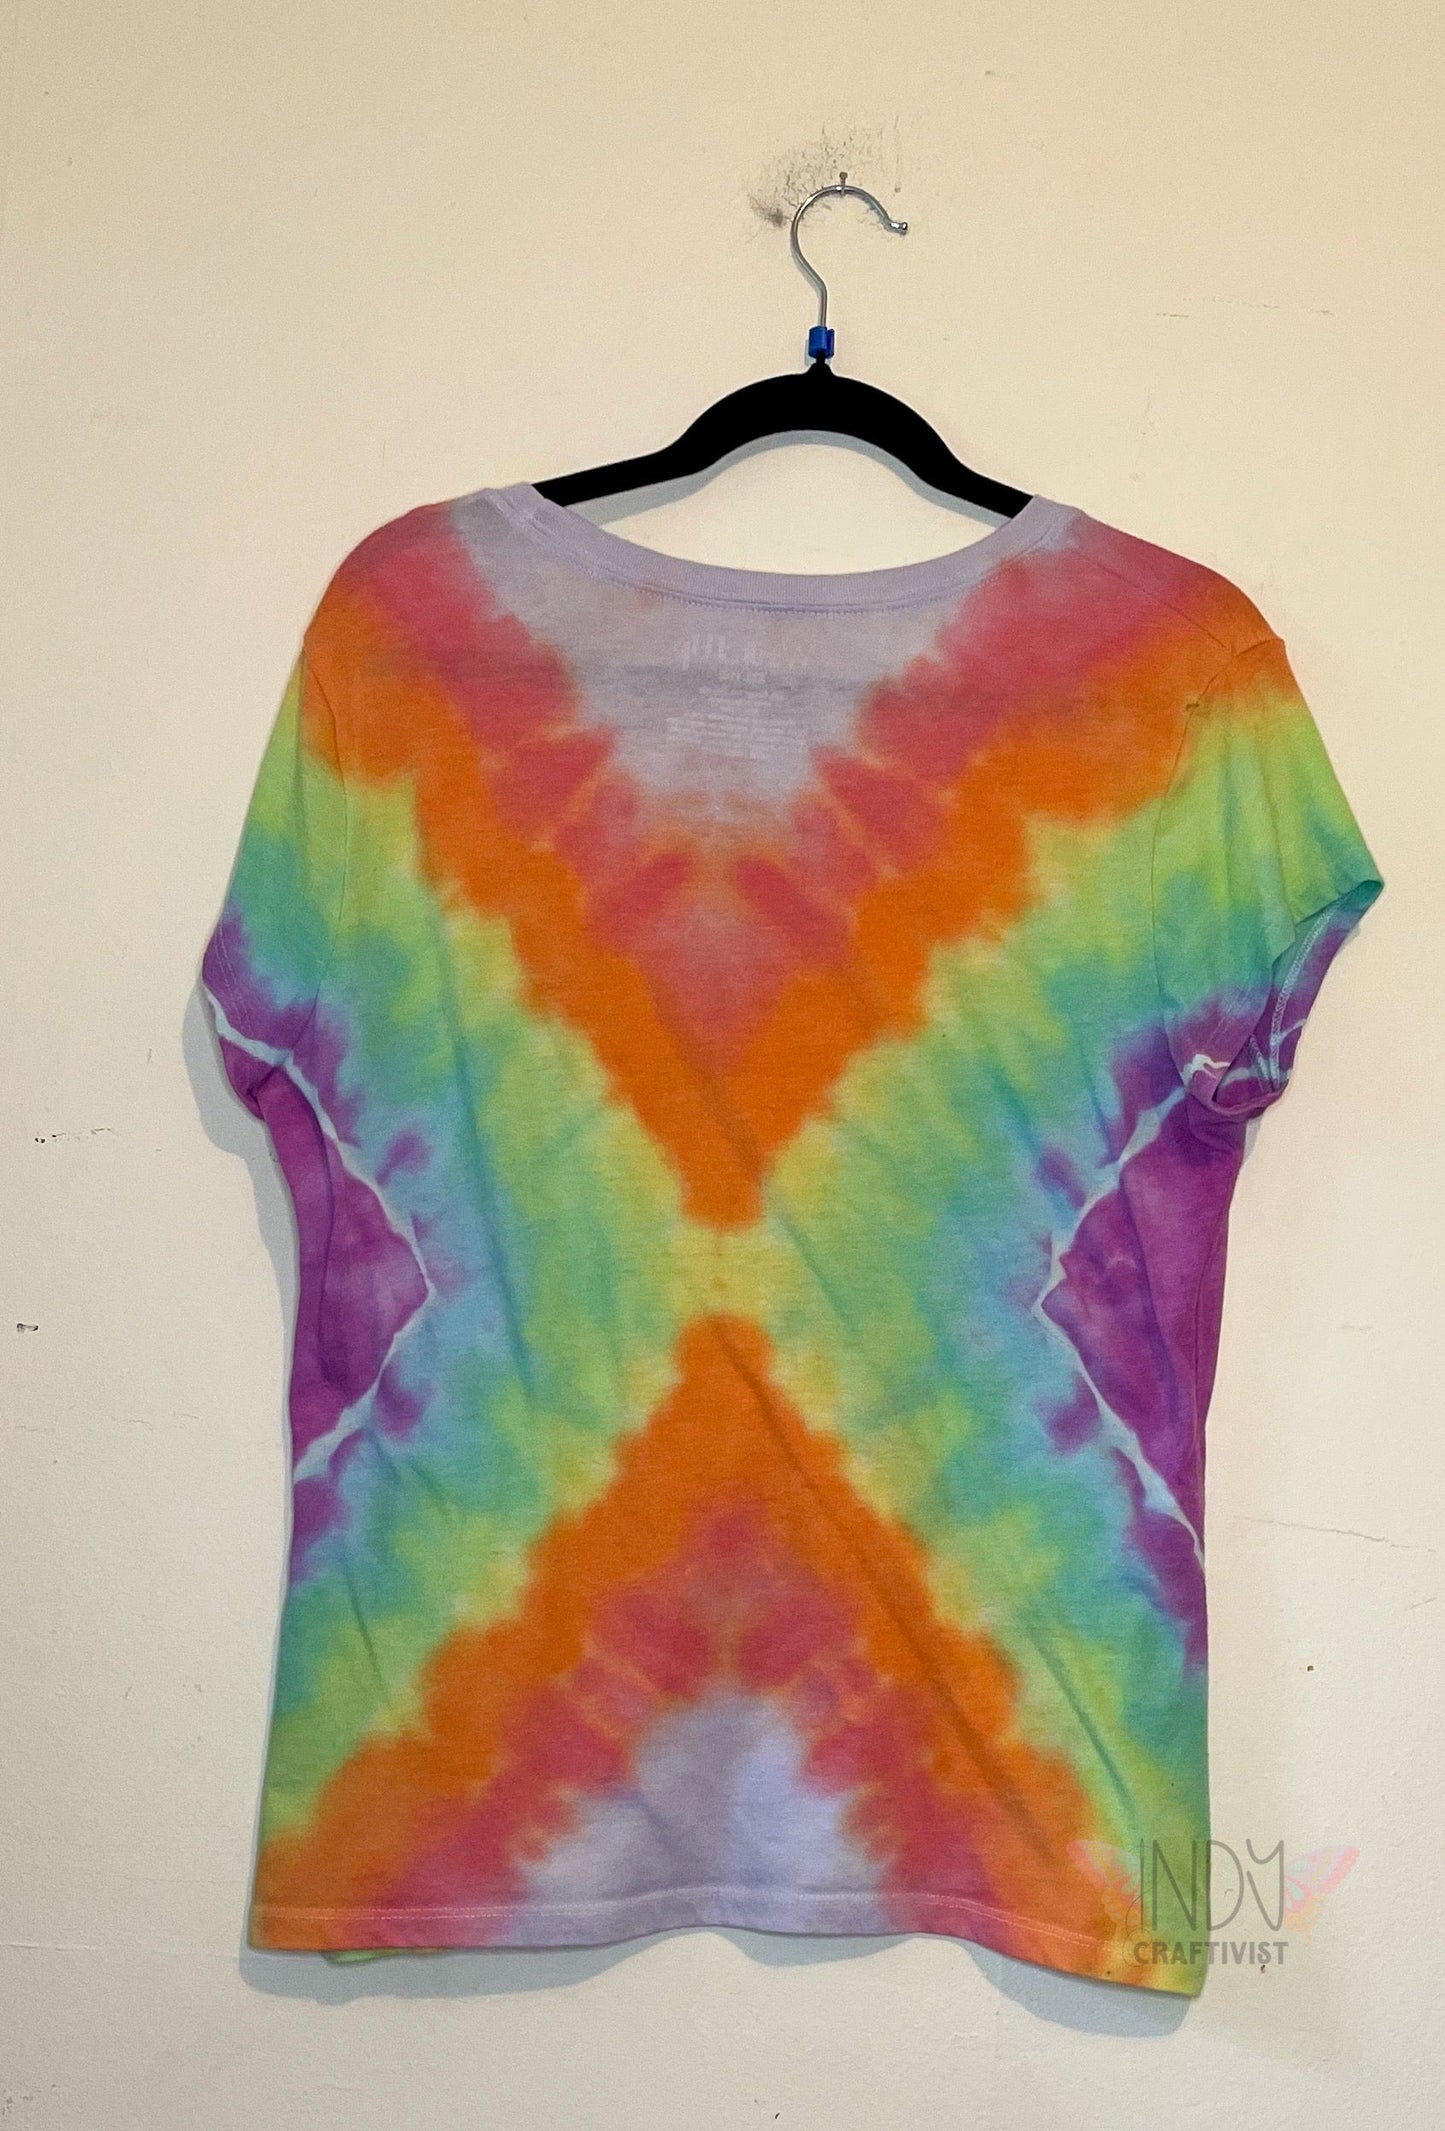 Look on the Bright Side Tie Dye Shirt